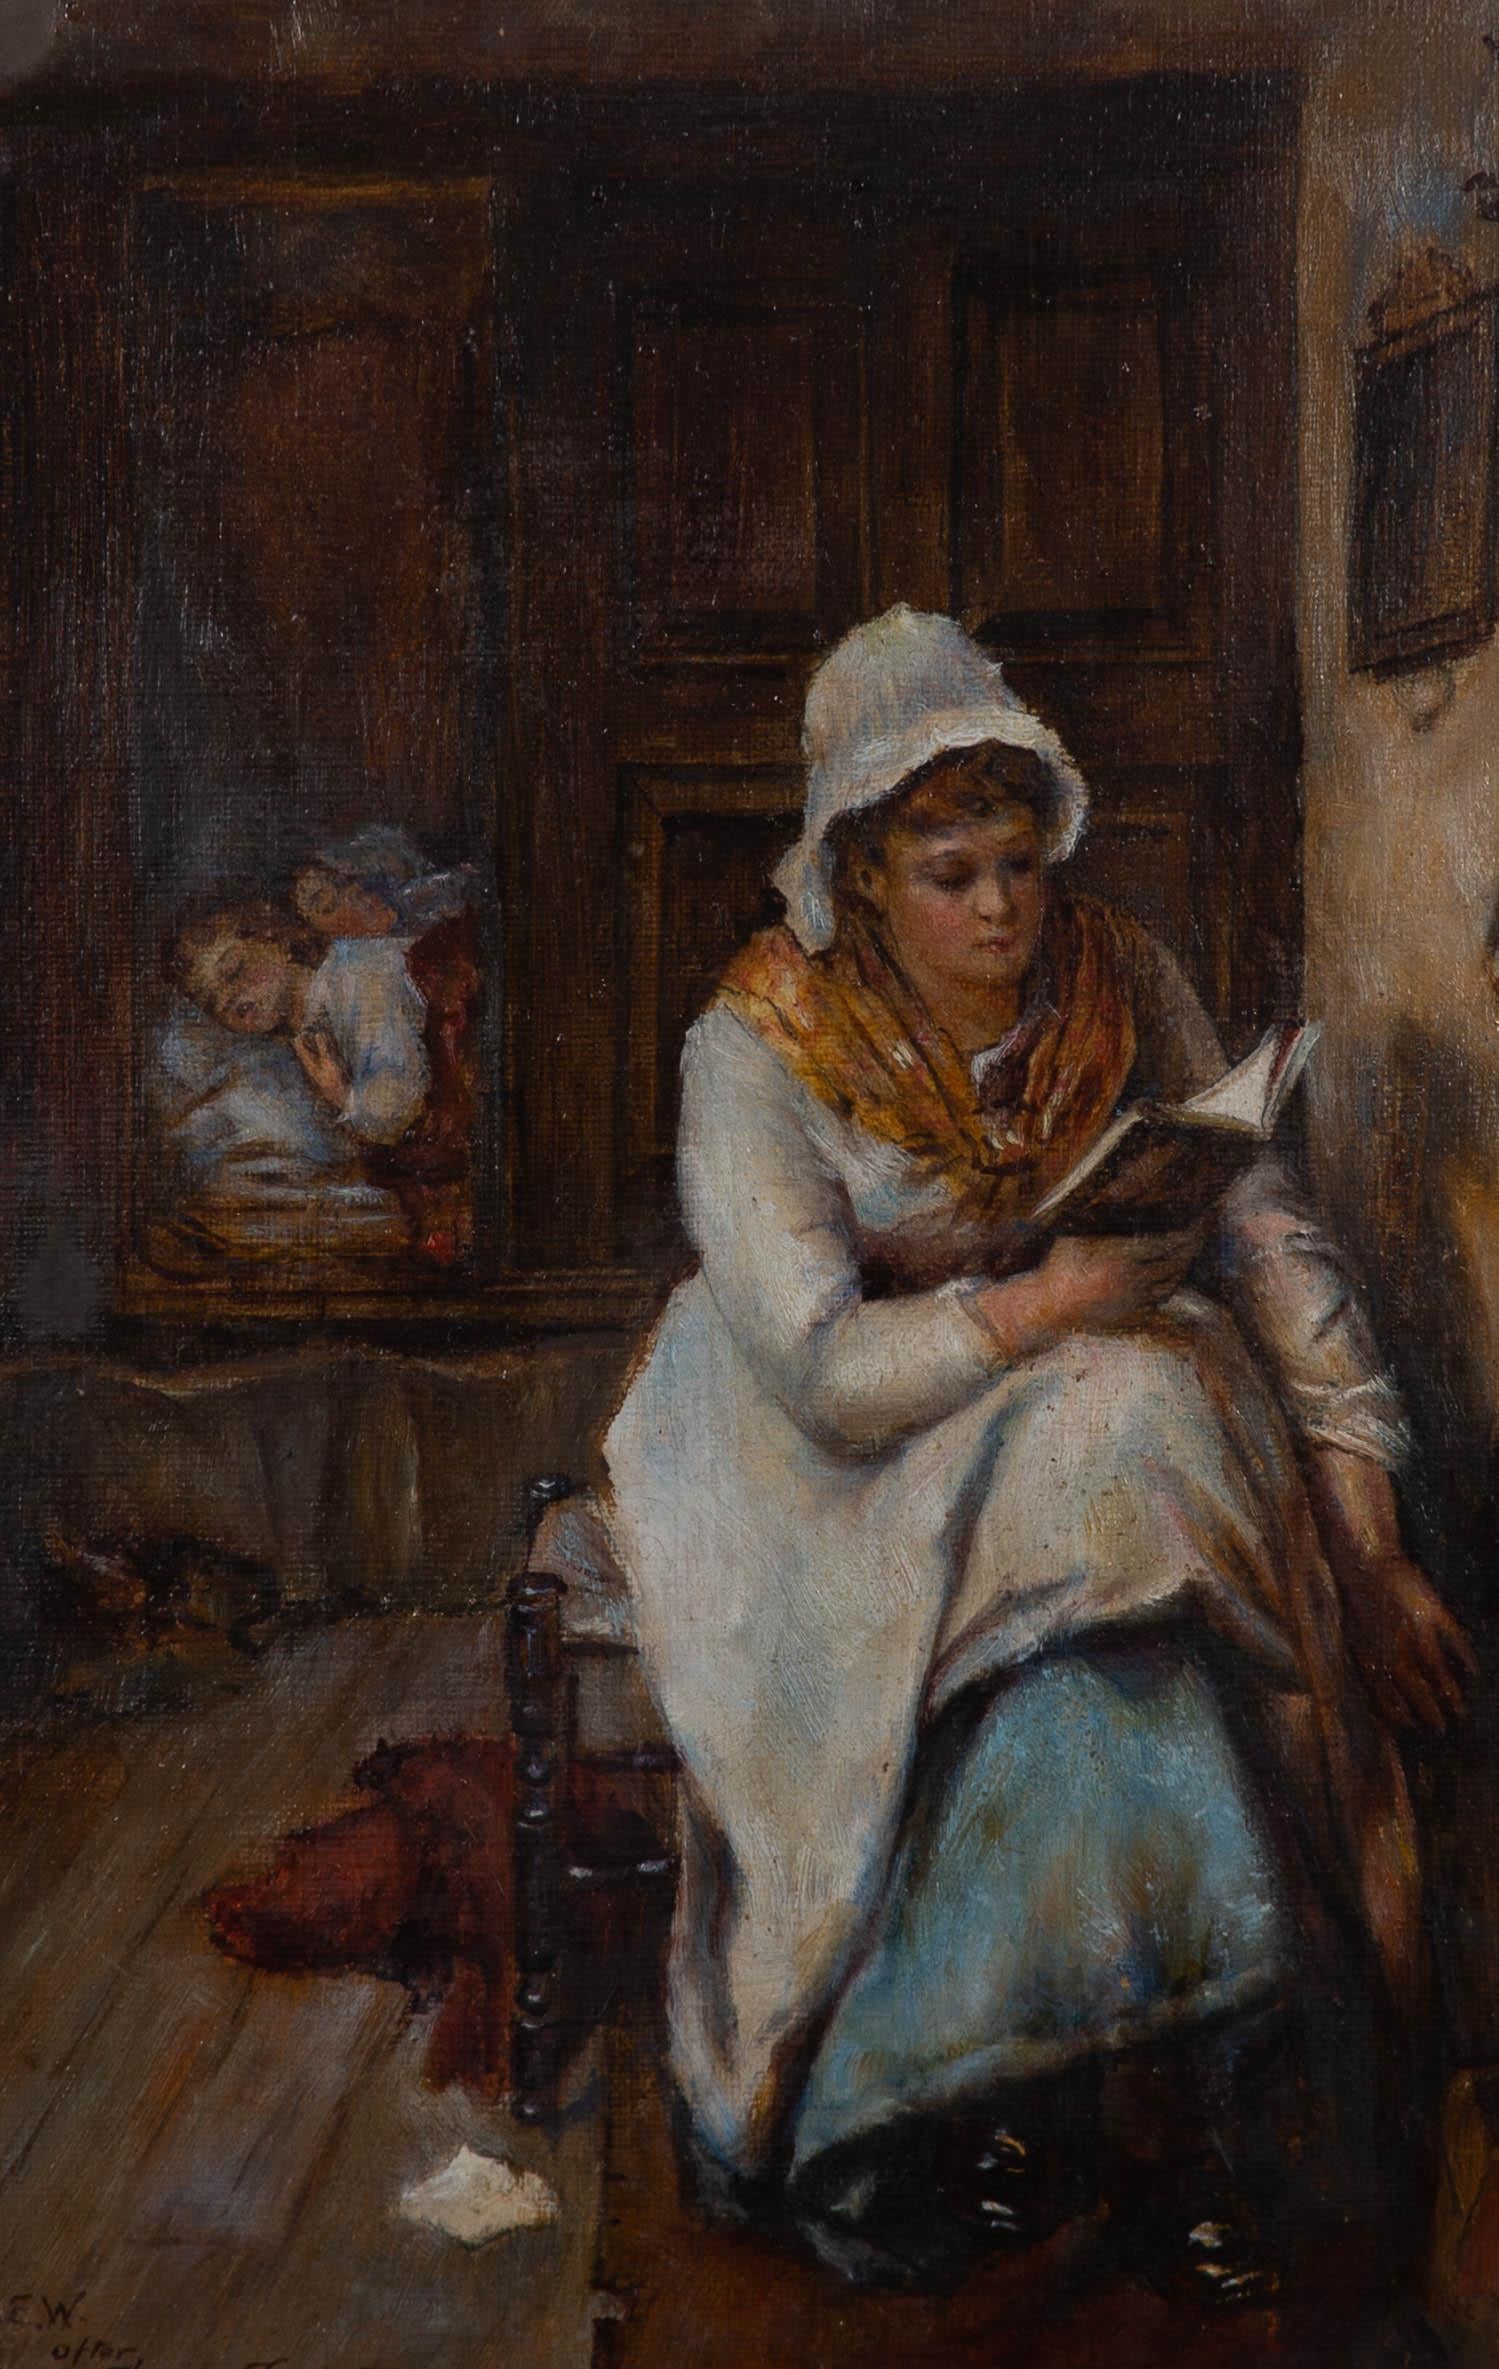 E.E.W. after Thomas Faed RSA (1826-1900) - Oil, When the Children are Asleep 2